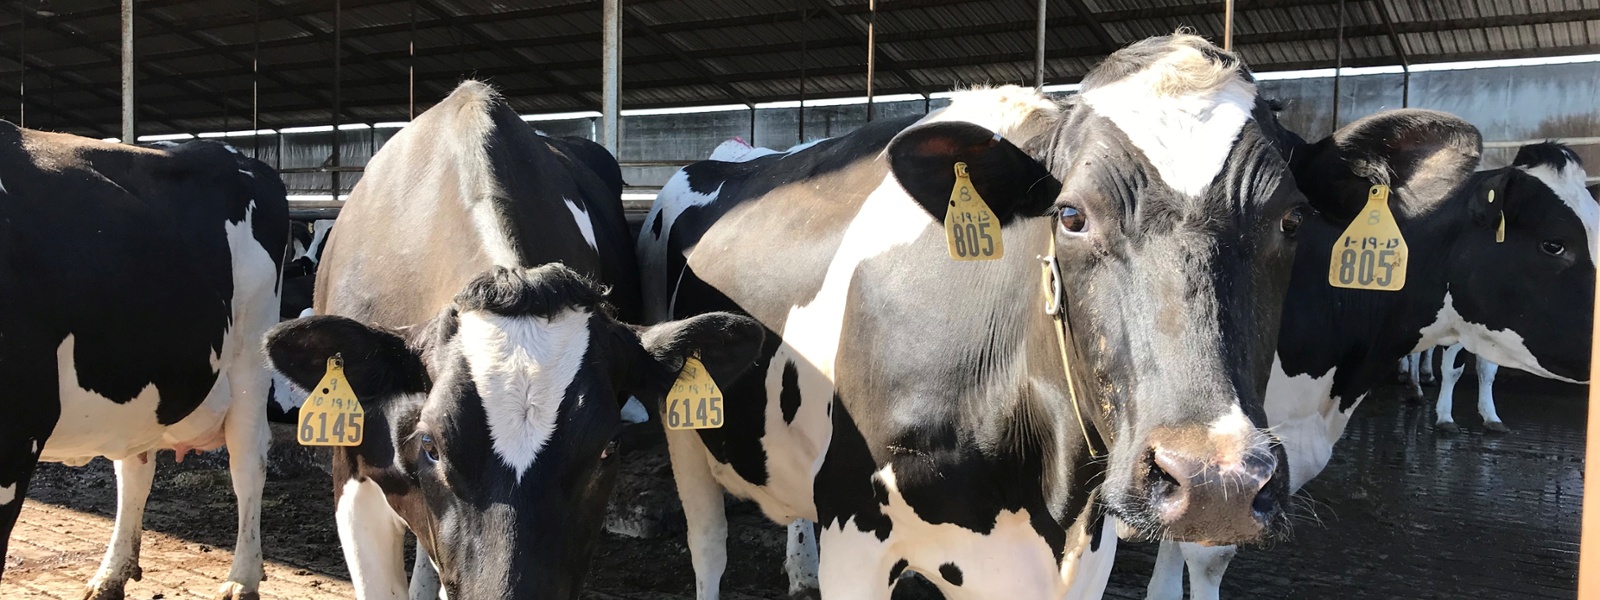 Dairy farmers look for new methane emission solutions